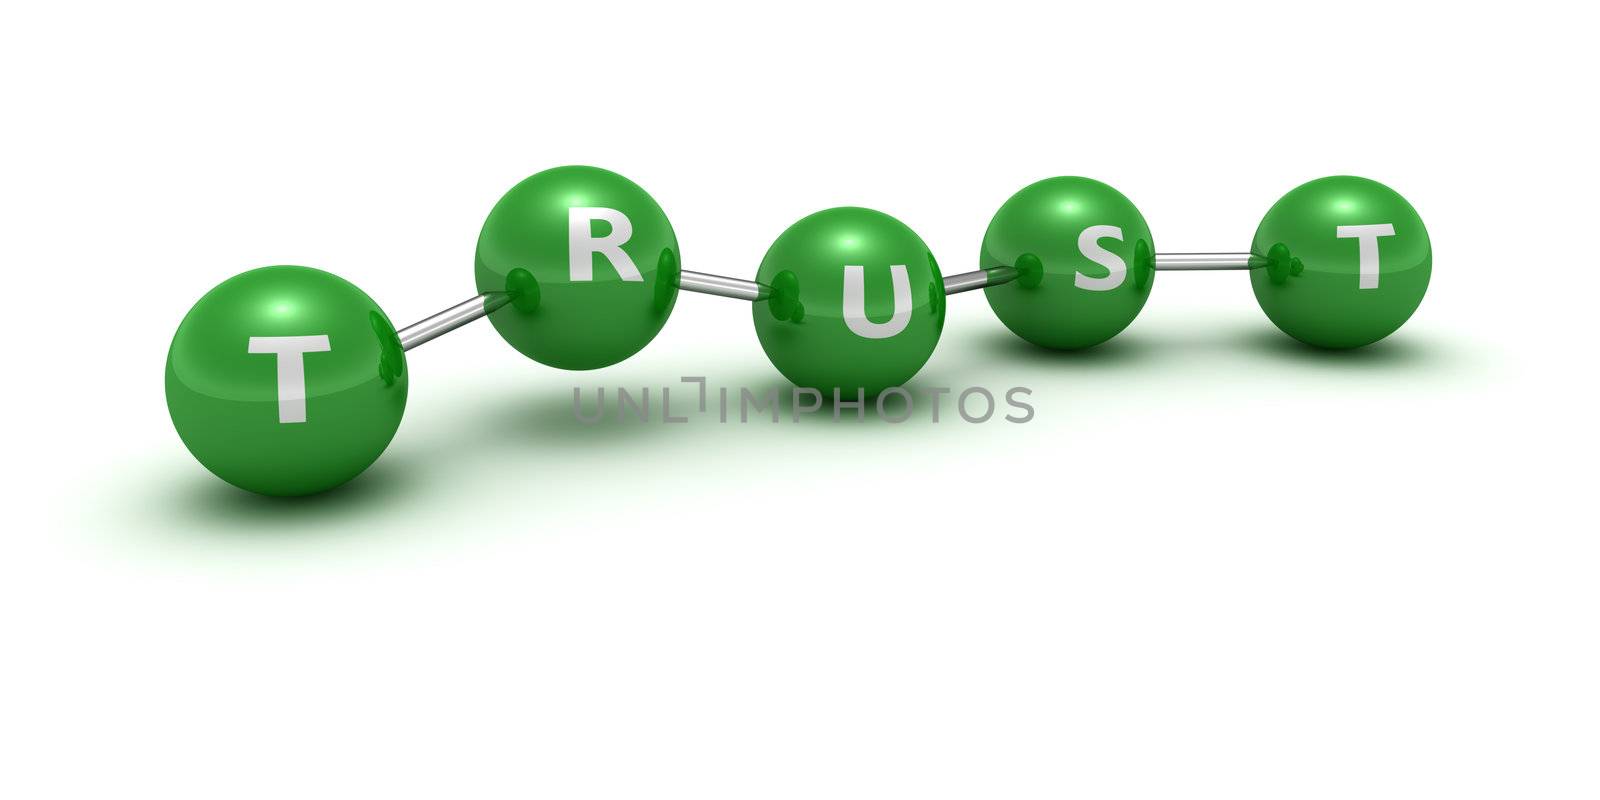 Green balls with word "Trust" connected by links